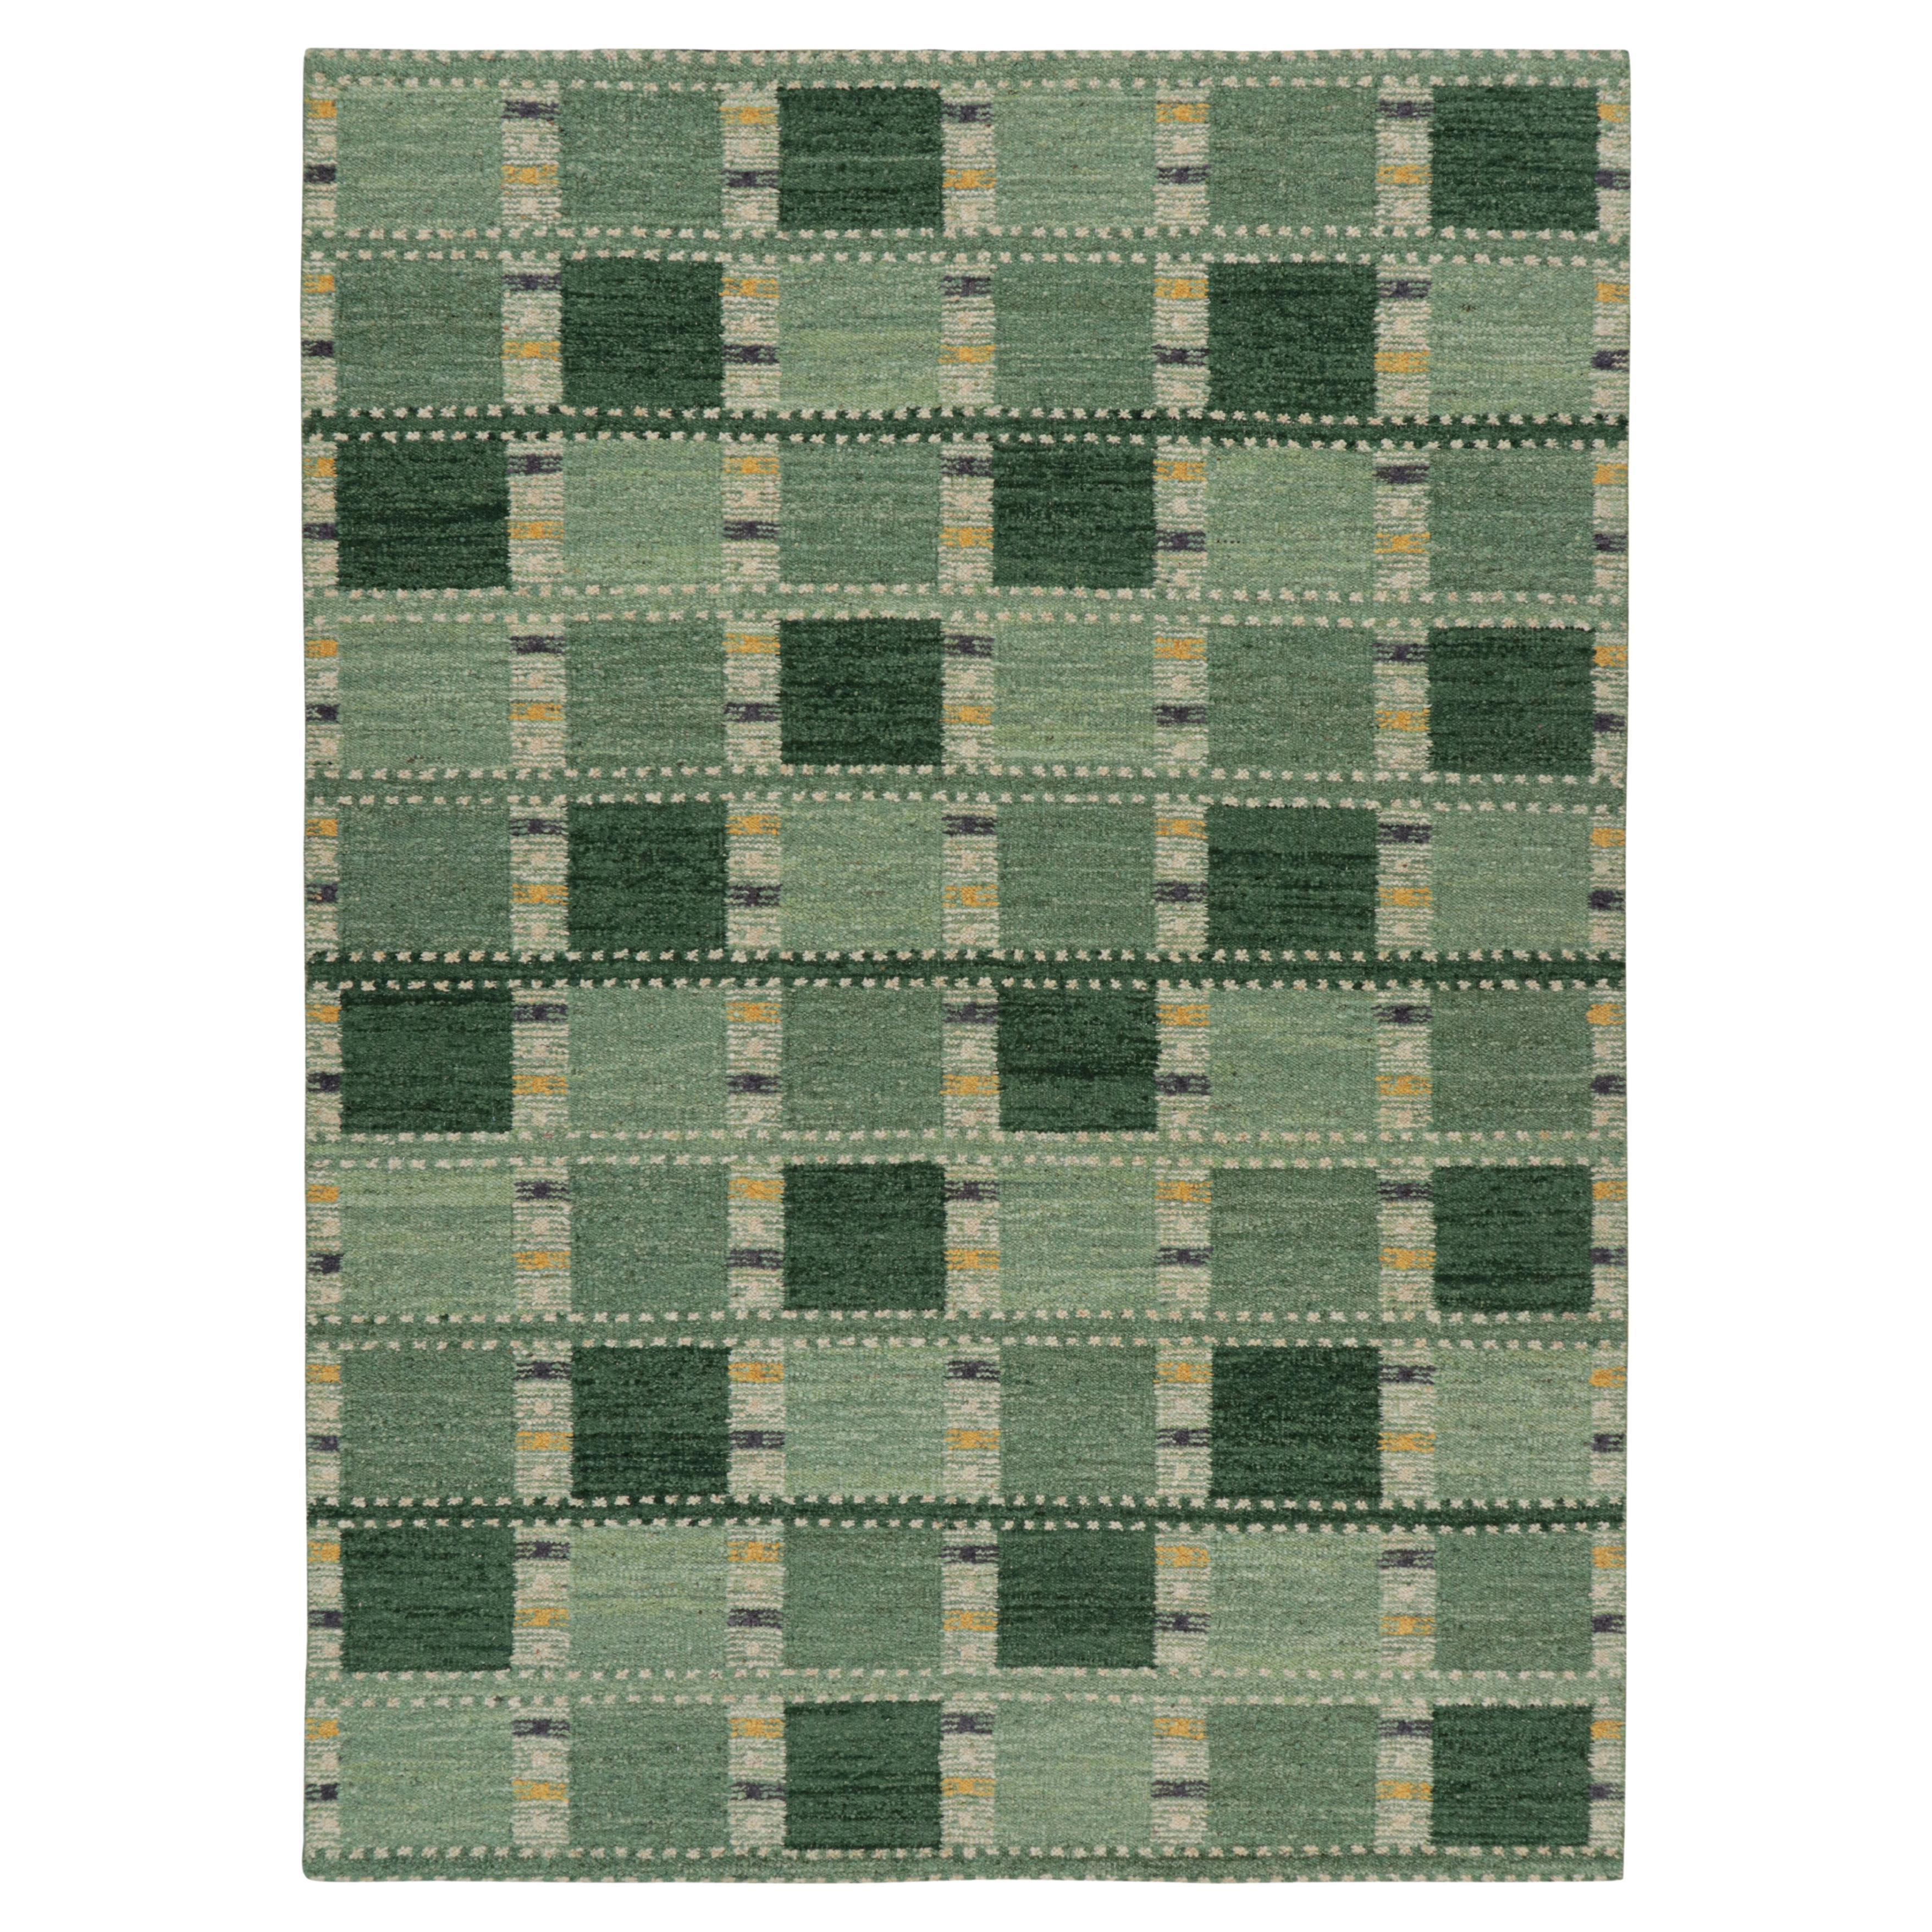 Rug & Kilim’s Scandinavian Style Rug in Green Tones, with Geometric Patterns